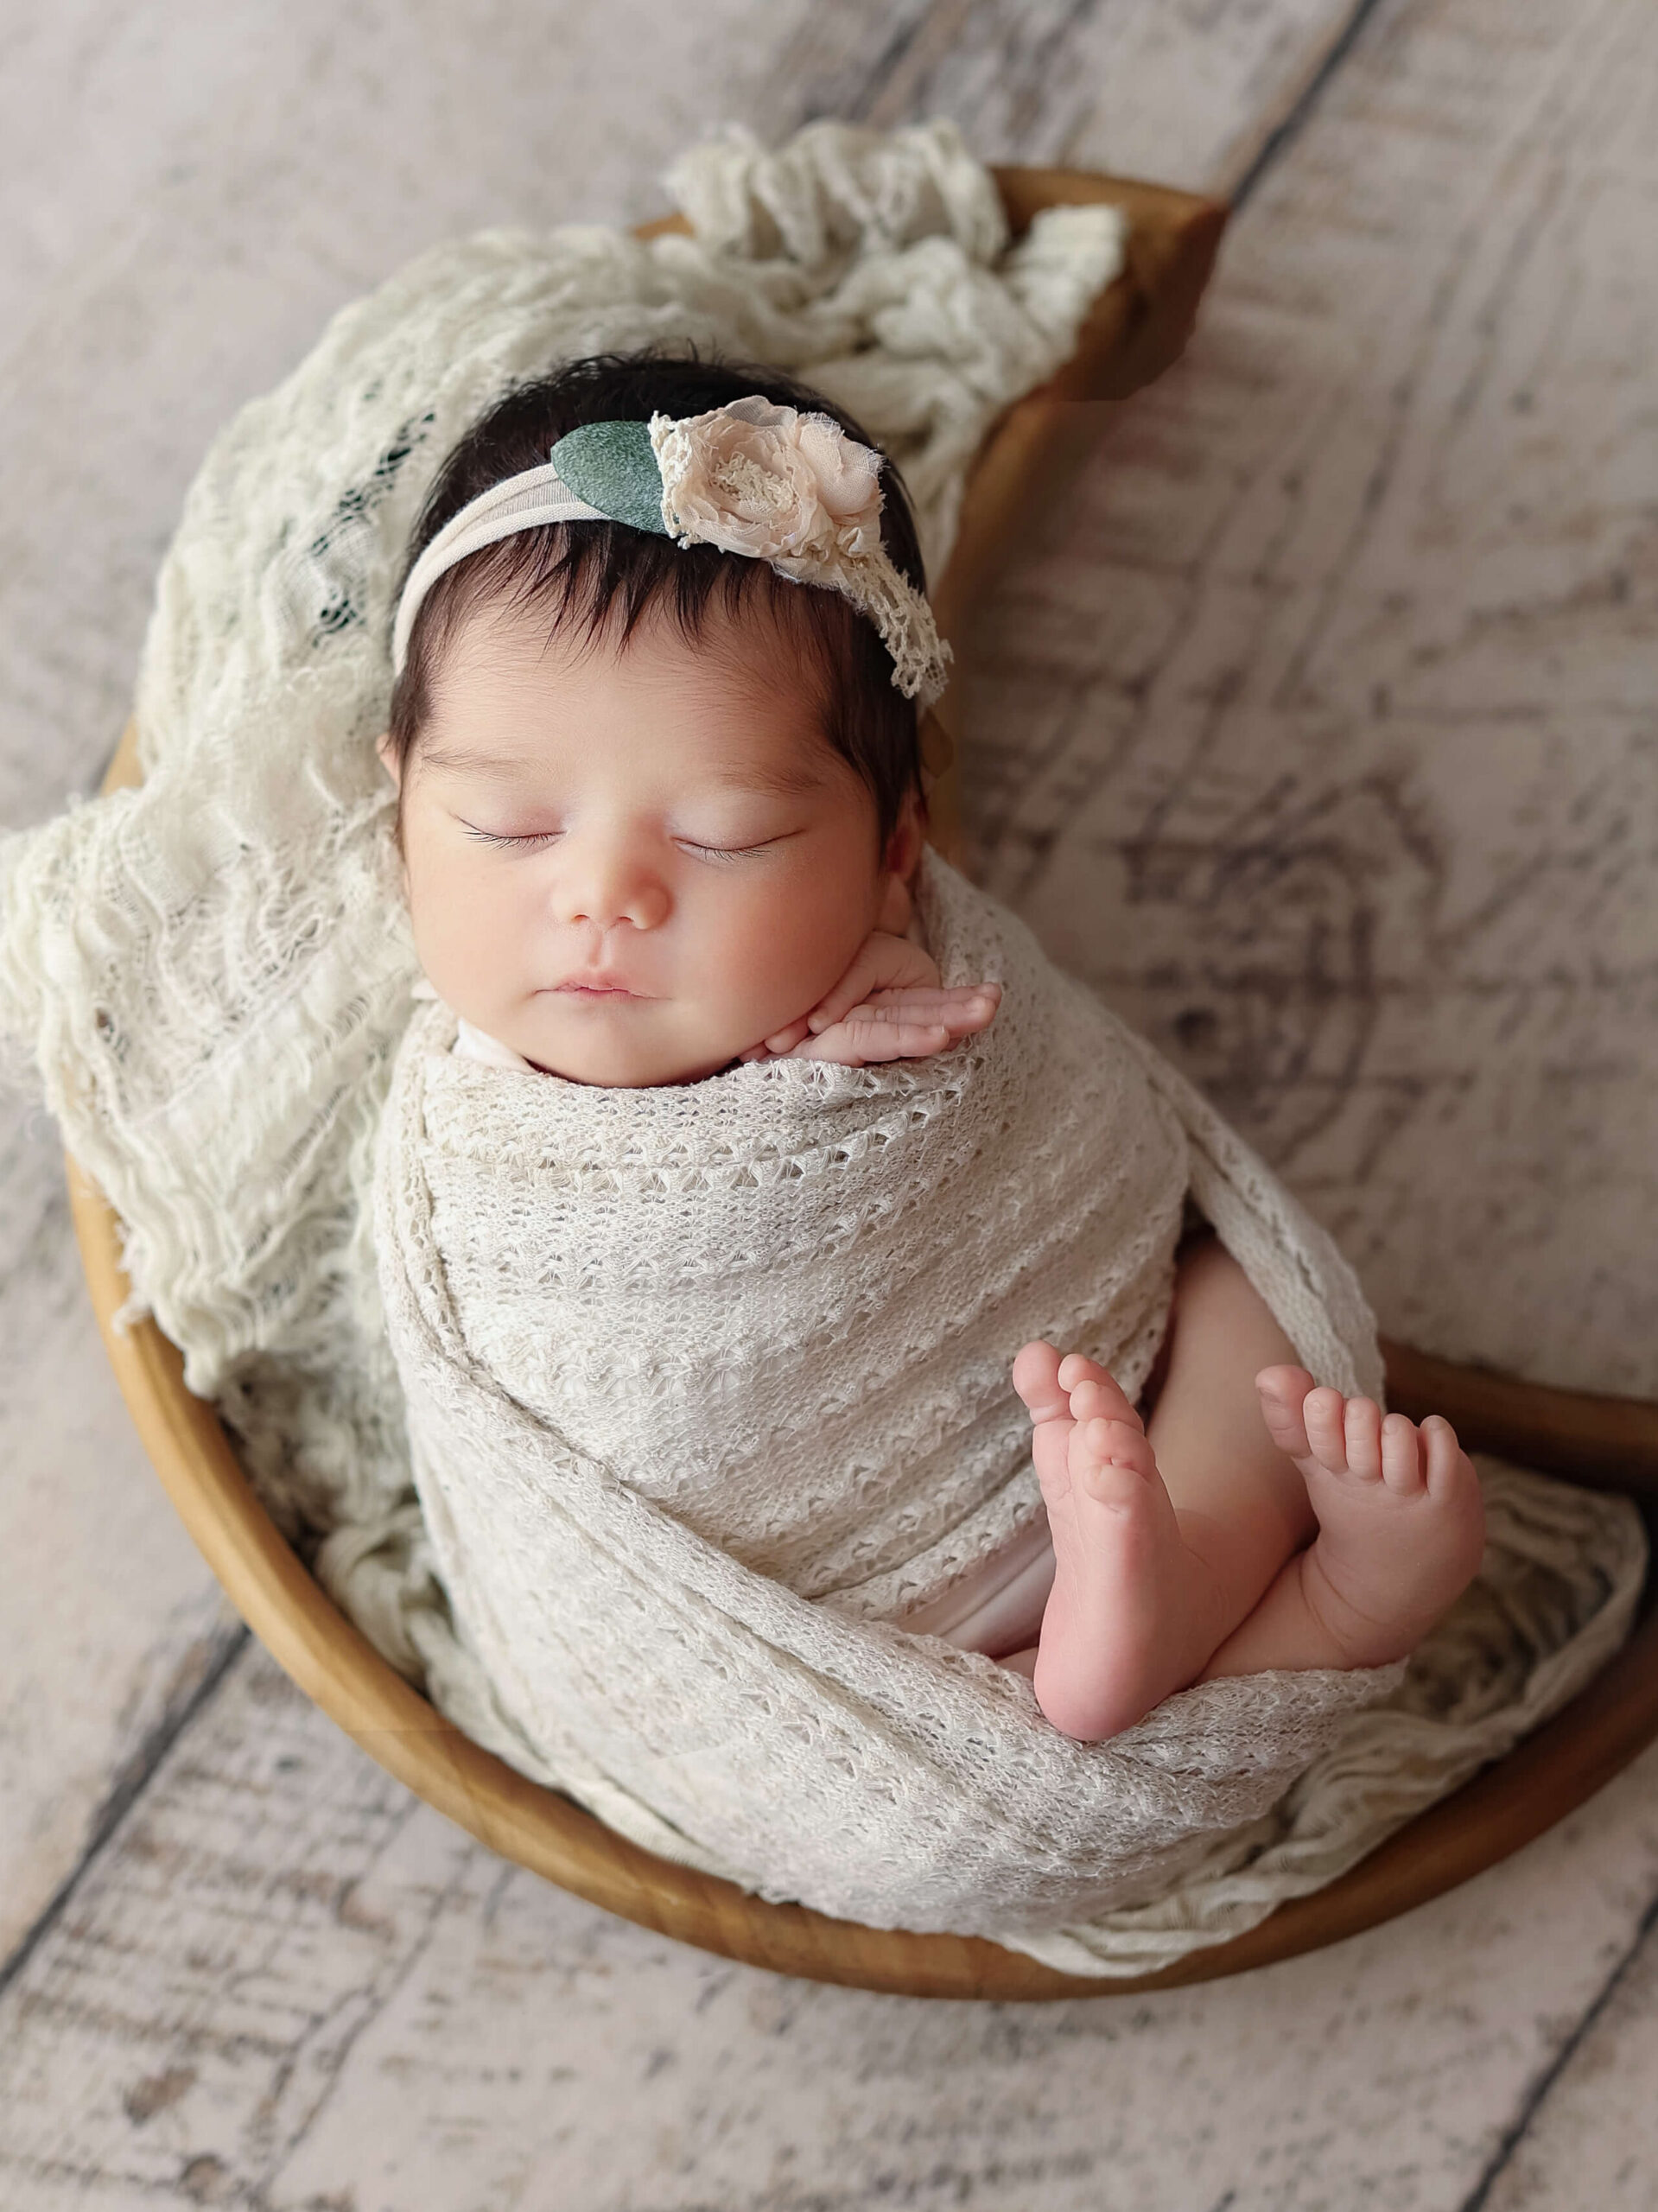 newborn photo taken by a Loudoun VA baby photographer, infant in a wrap and headband laying in a wooden moon shaped bowl at a baby photo shoot